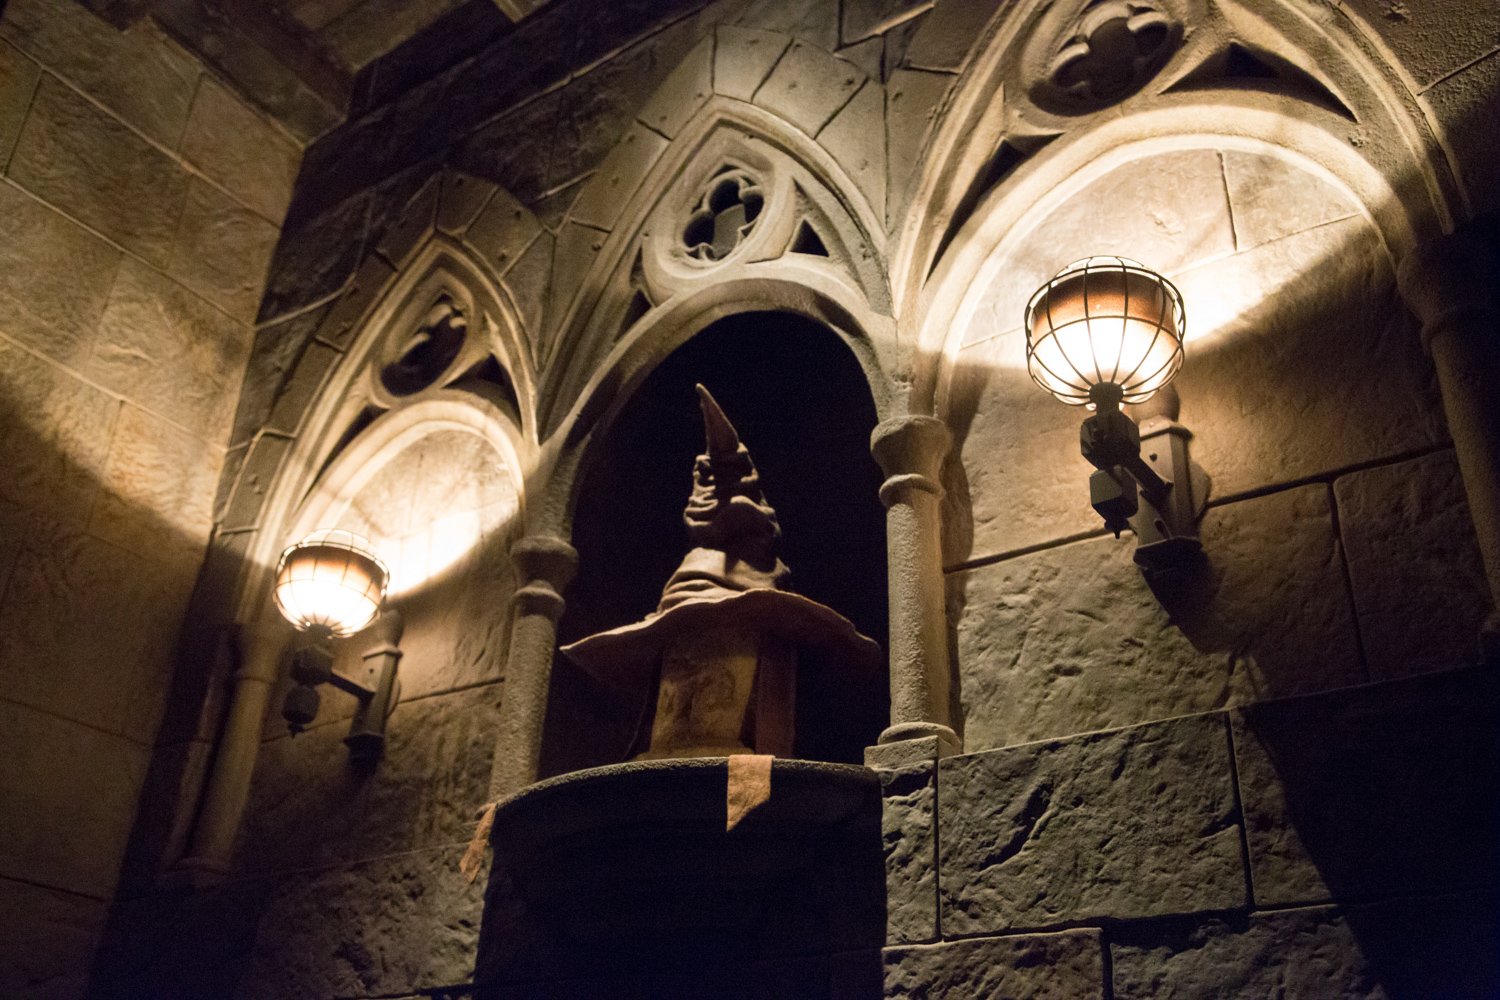 universal_studios_hollywood_harry_potter_world_review-6